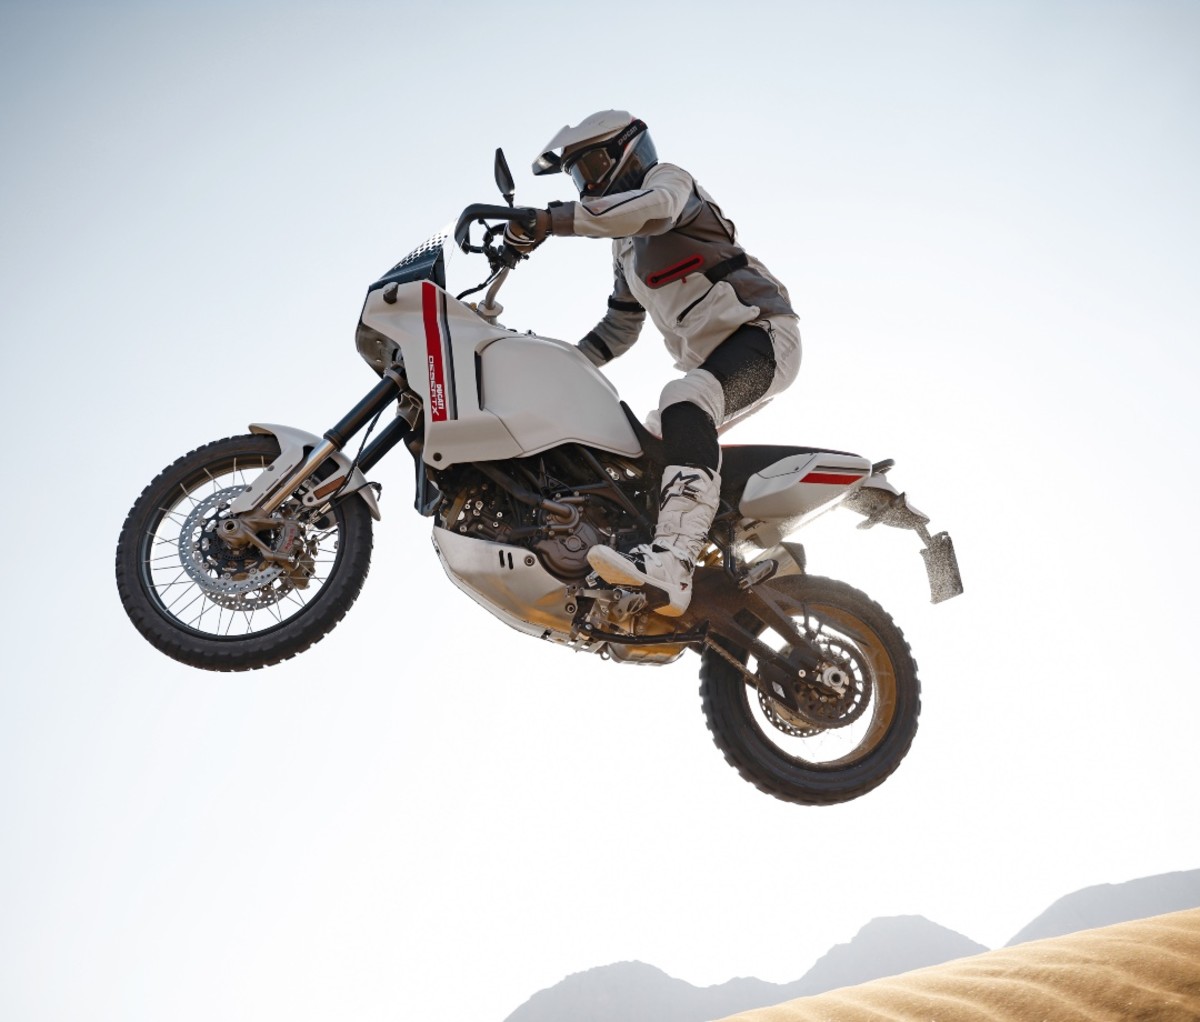 A motorcycle rider on an adventure bike jumping a sand dune.